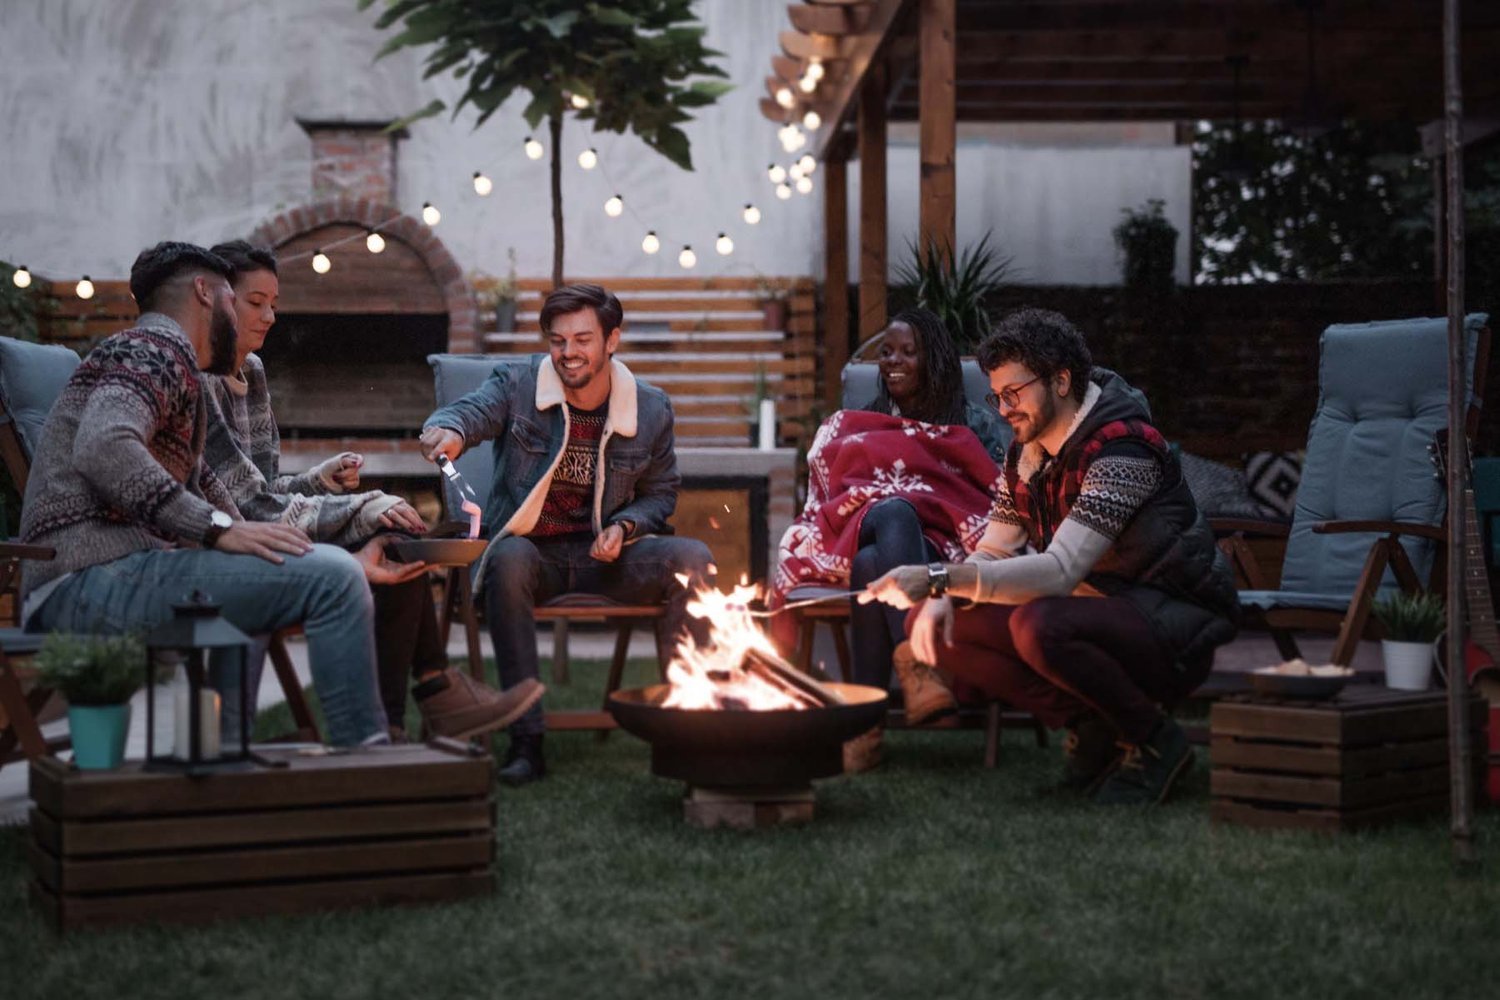 How to put out a fire pit: Nine tips to enjoy yours safely